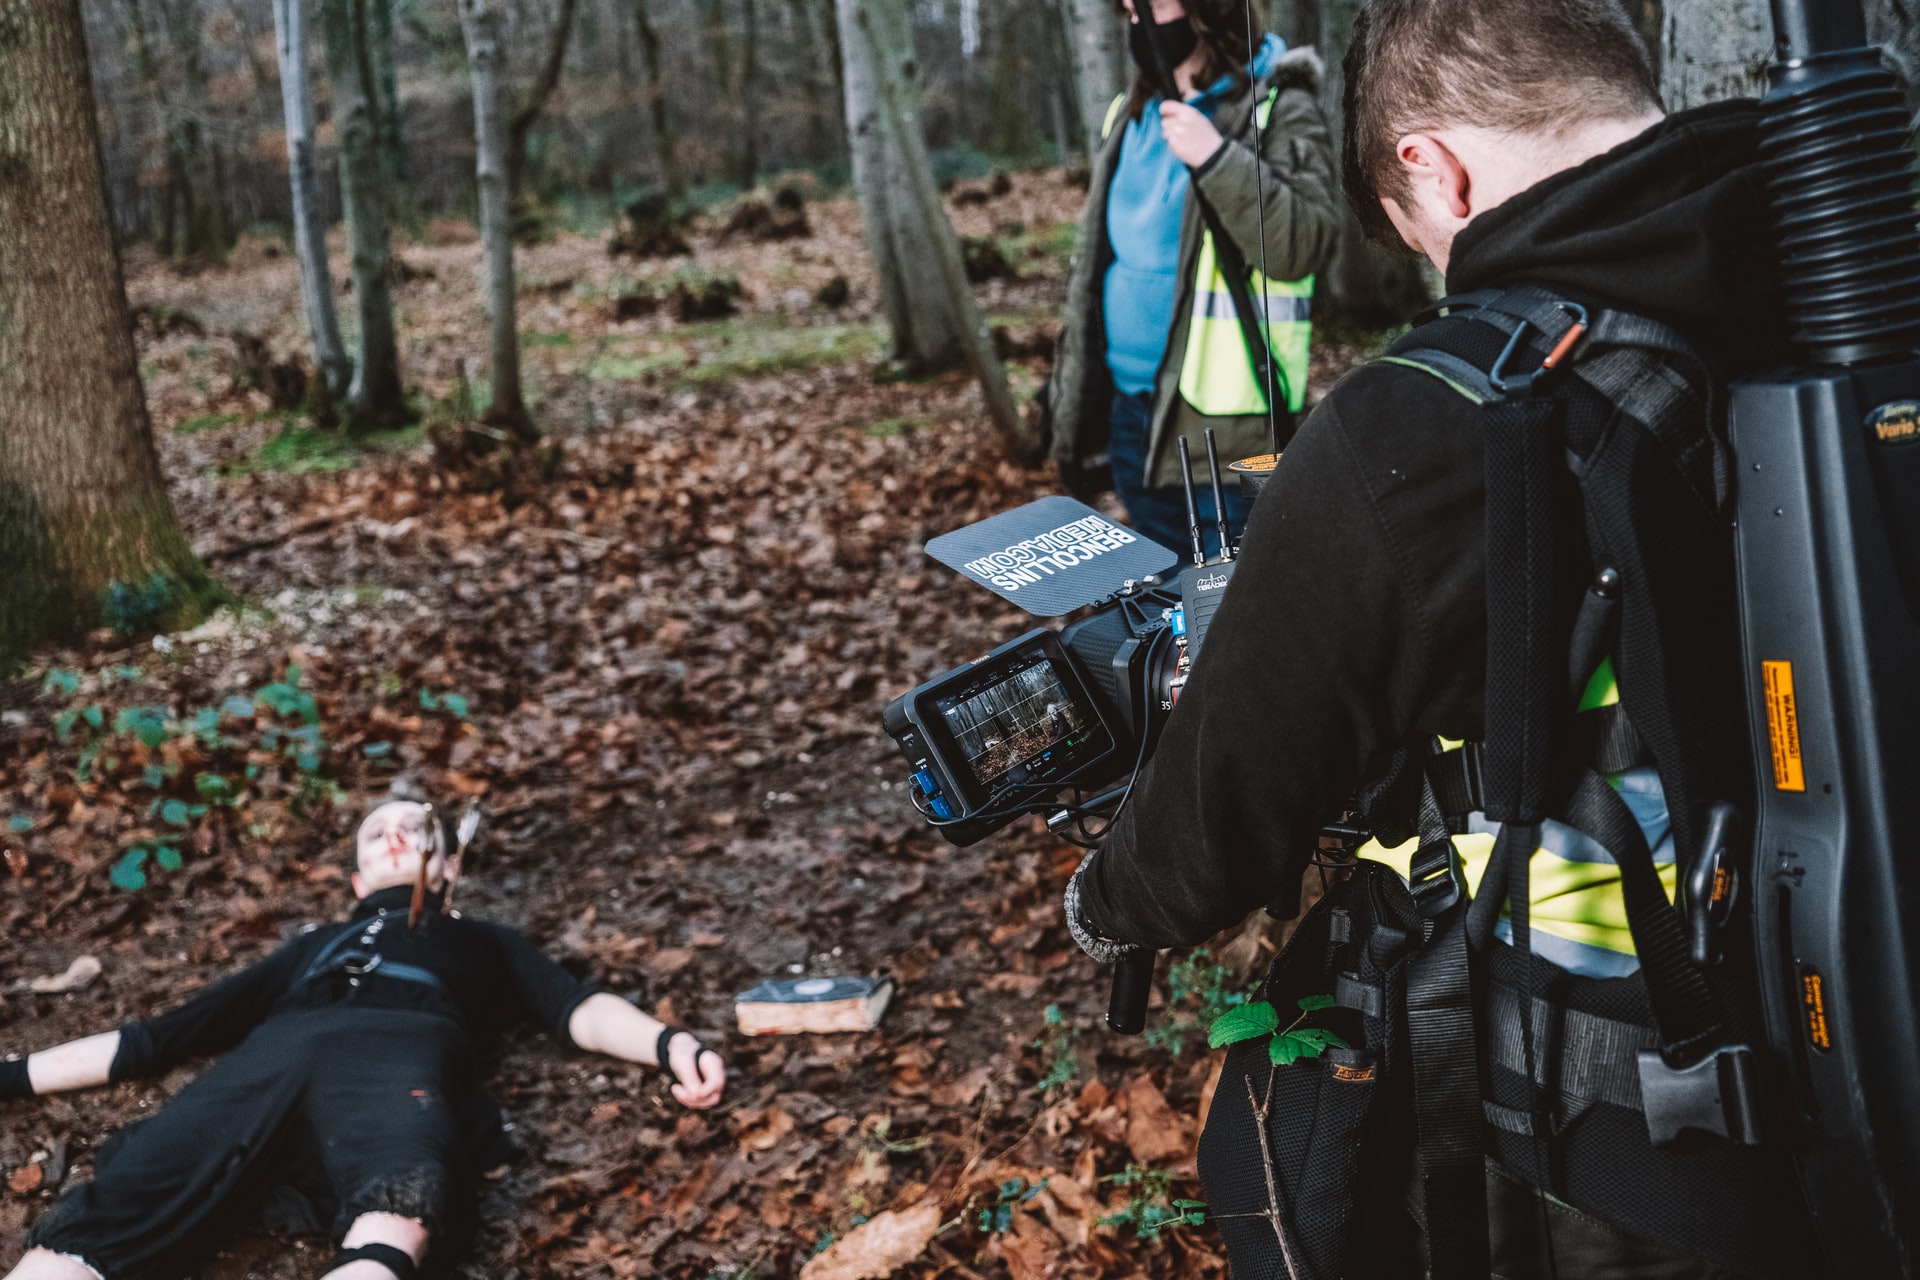 The Complete Guide to Hiring an Action Photographer